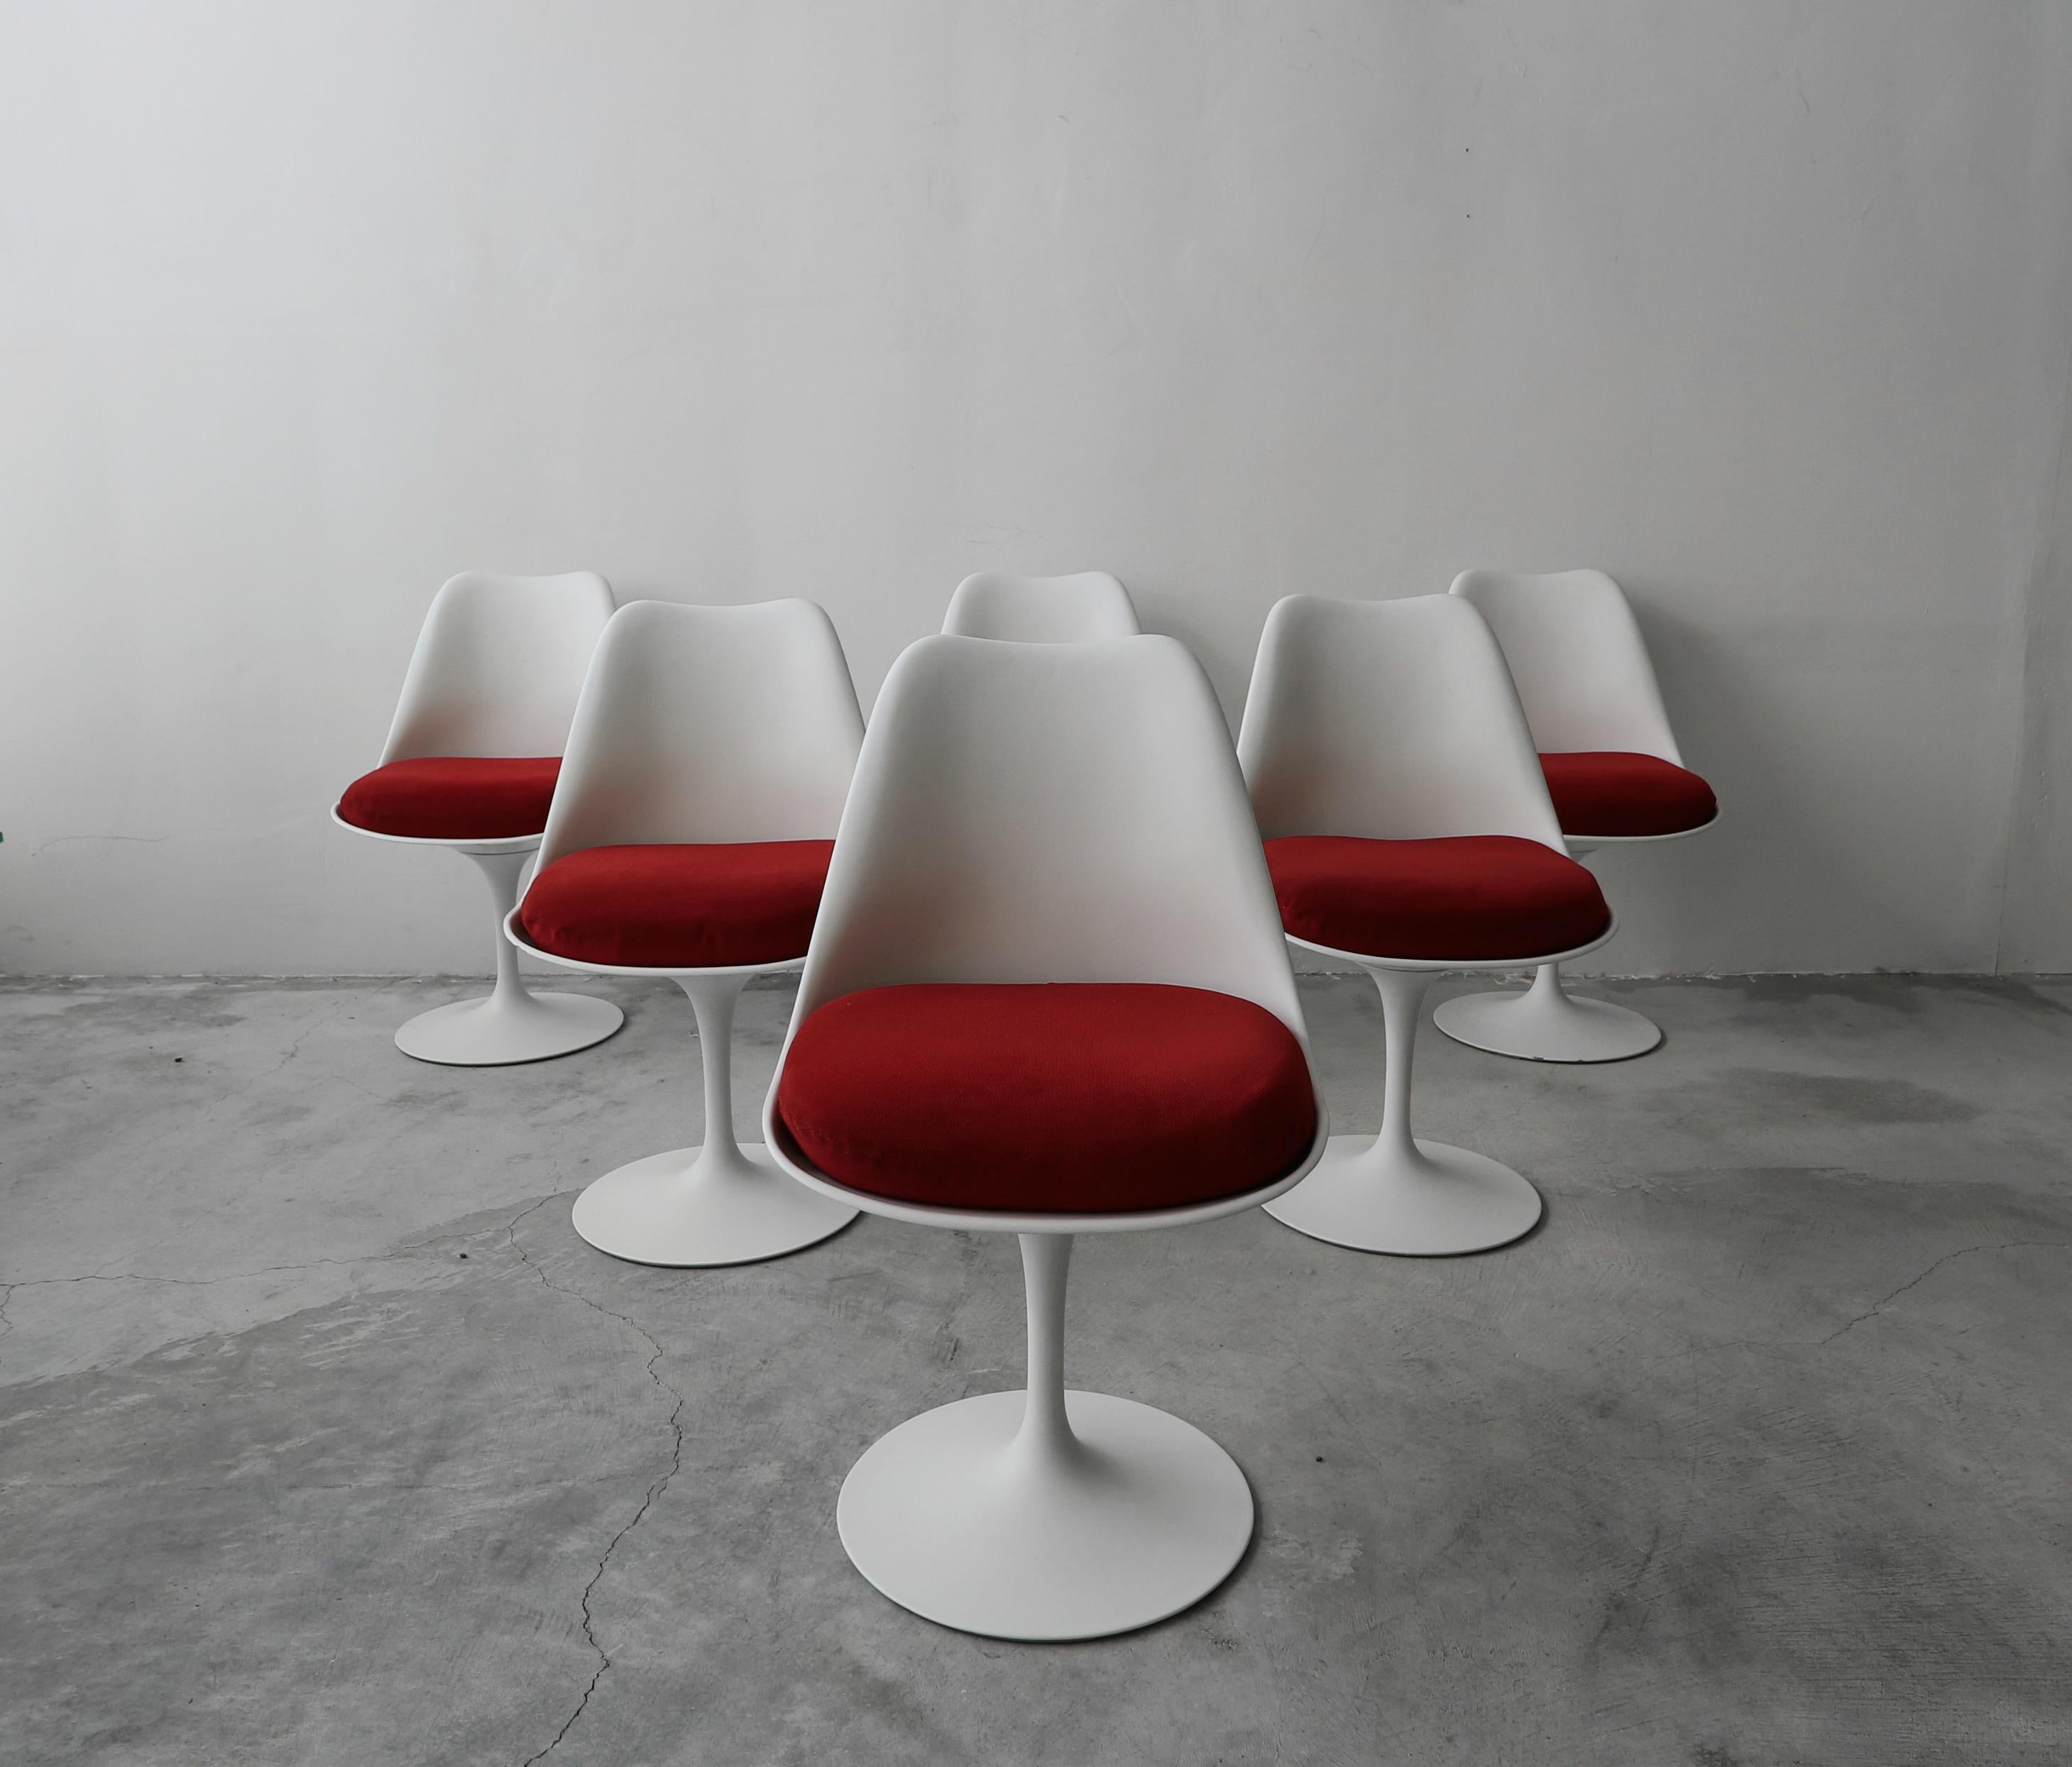 Set of 6, authentic midcentury Tulip chairs designed by Eero Saarinen for Knoll. The label with the 320 Park address dates it to 1961-1969.

Chairs are in overeall great condition for their age. We have left them as found, I highlighted the most